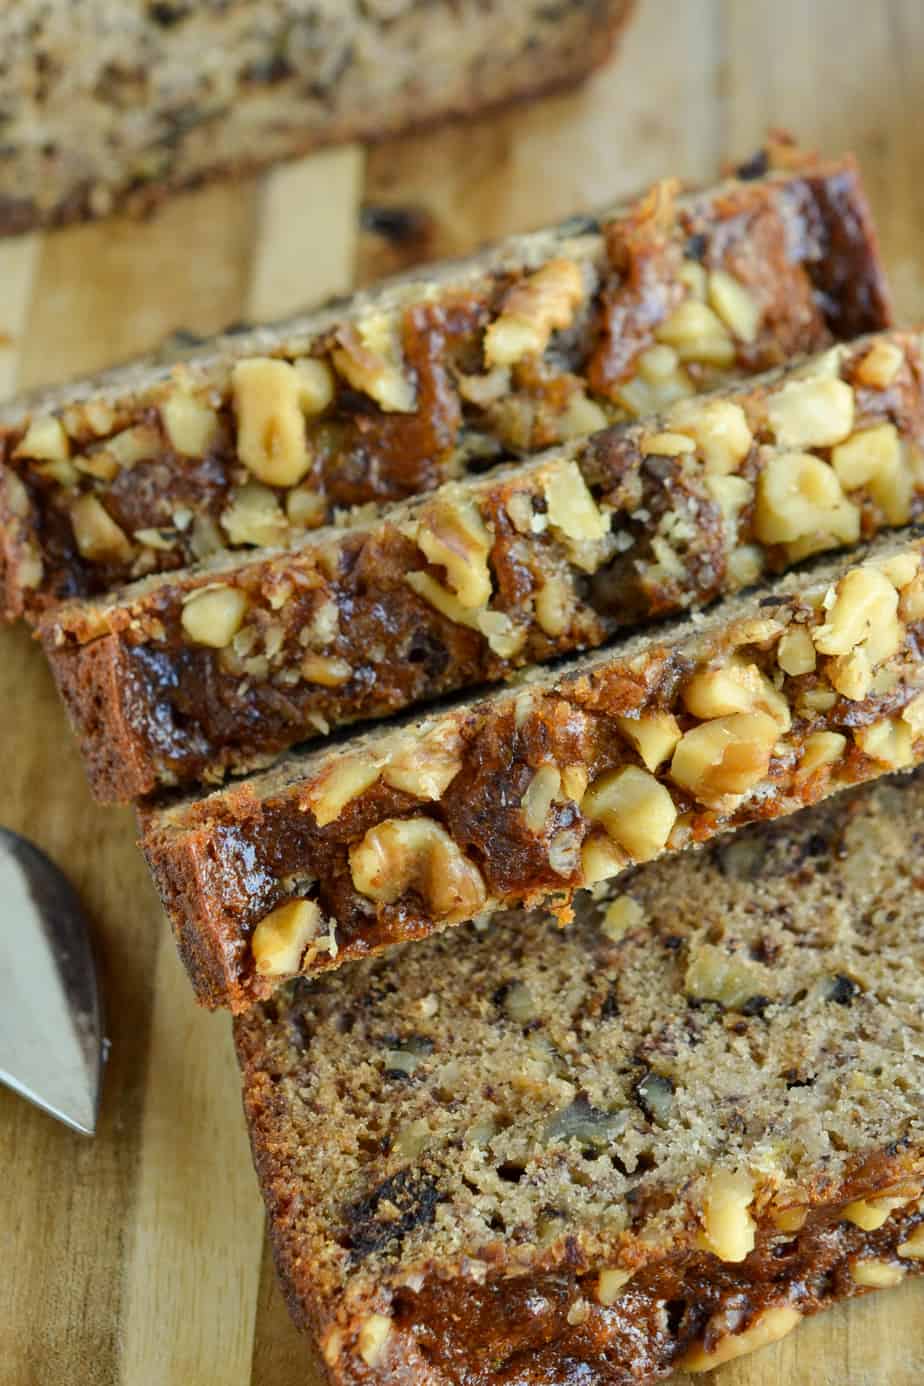 The Best Banana Bread Recipe (With Video)